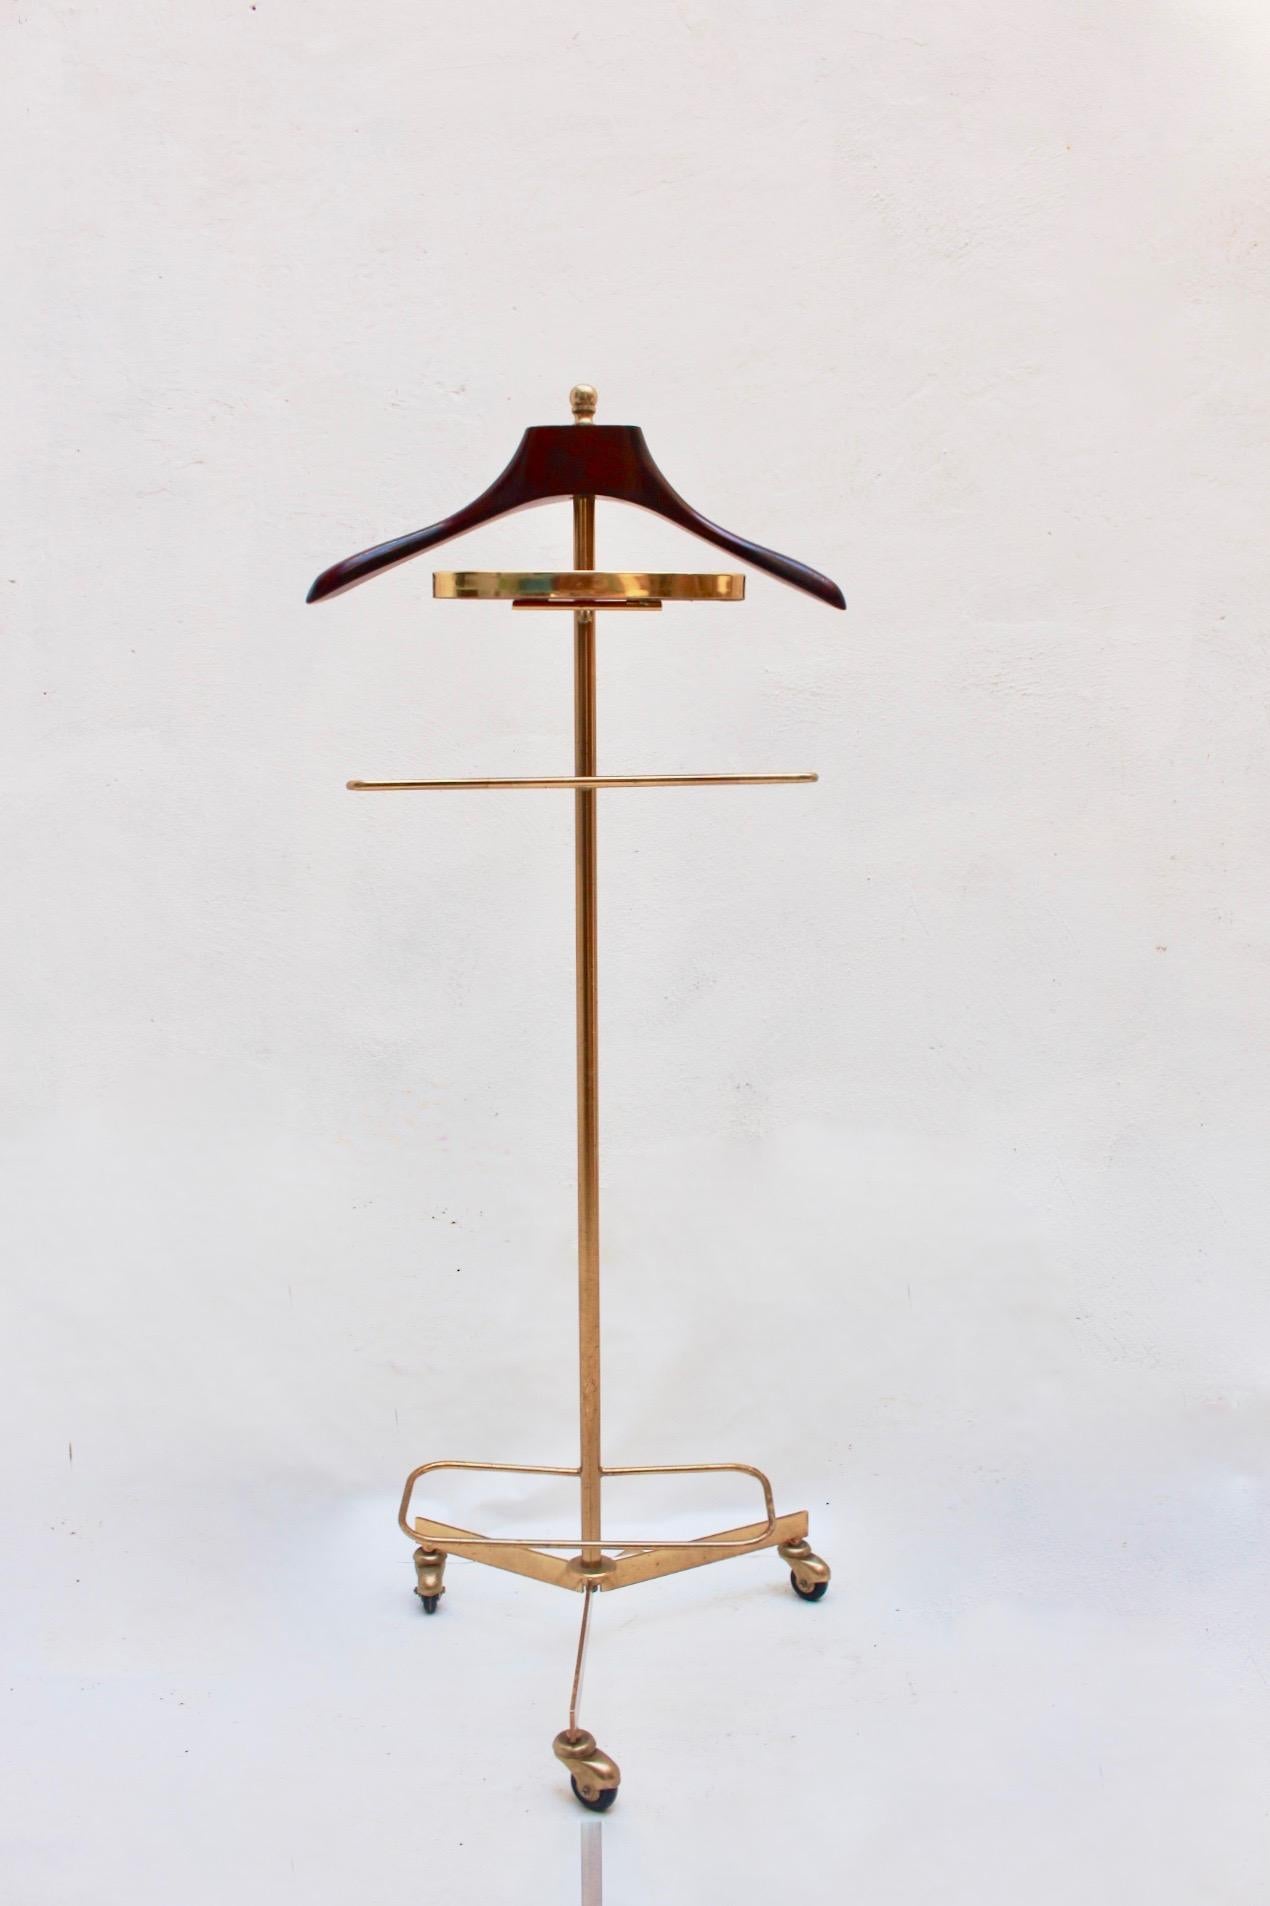 Midcentury valet clothes metal & wood stand, 1950s.